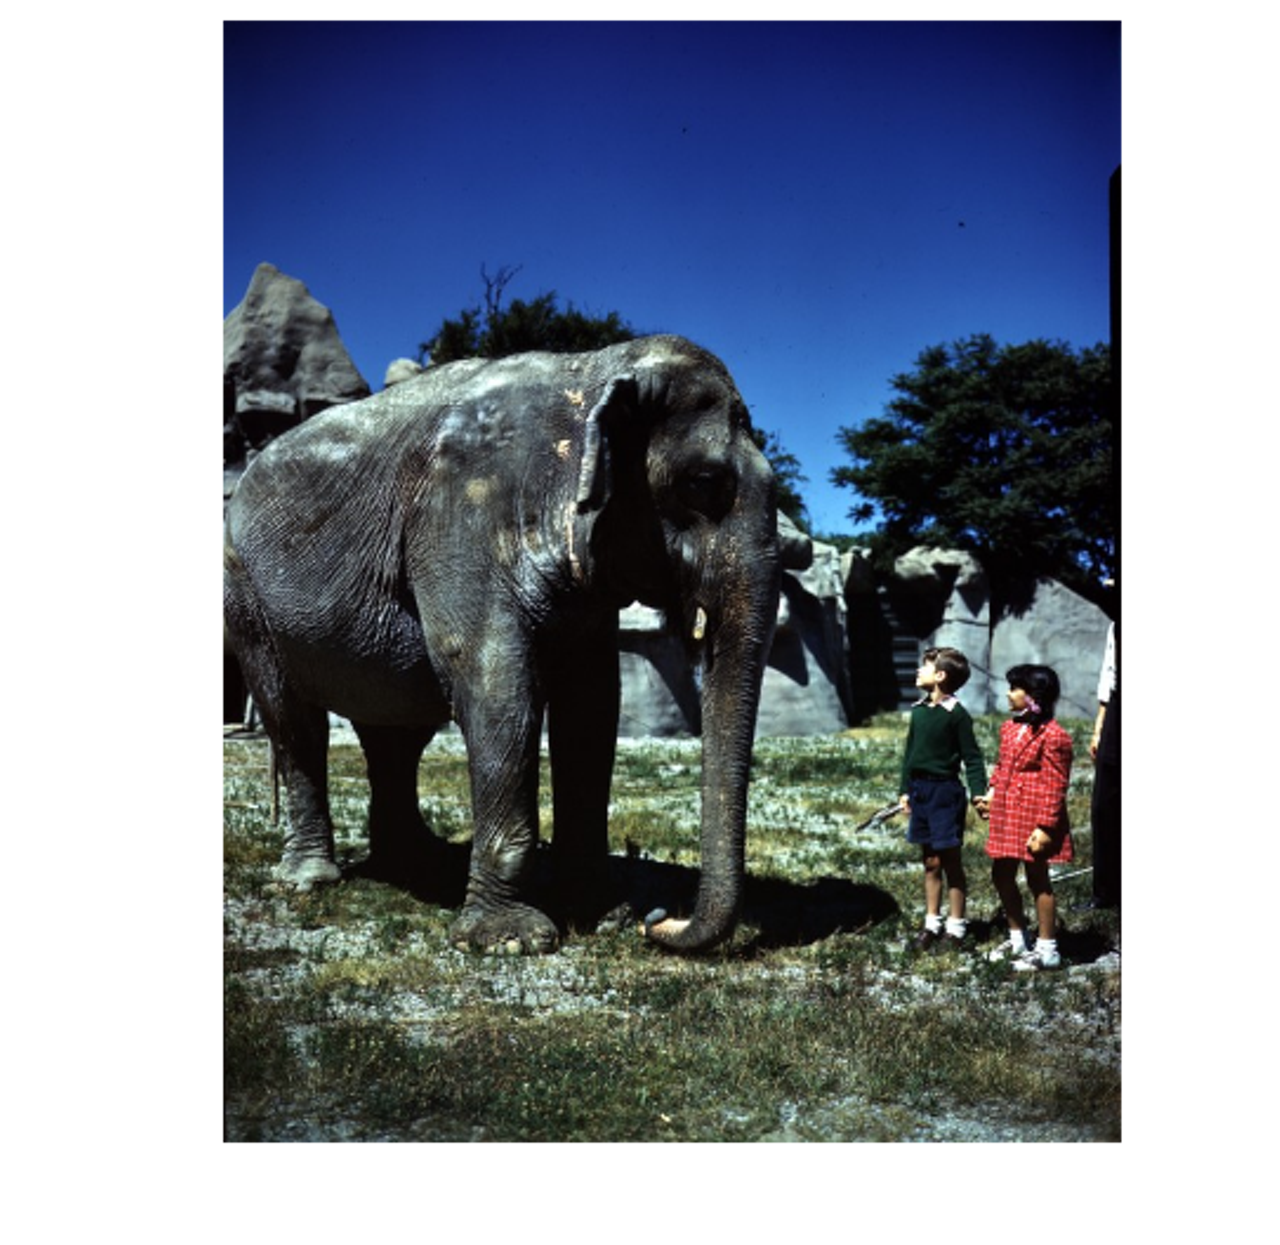 How did these kids get to close to this elephant? (Circa 1946)